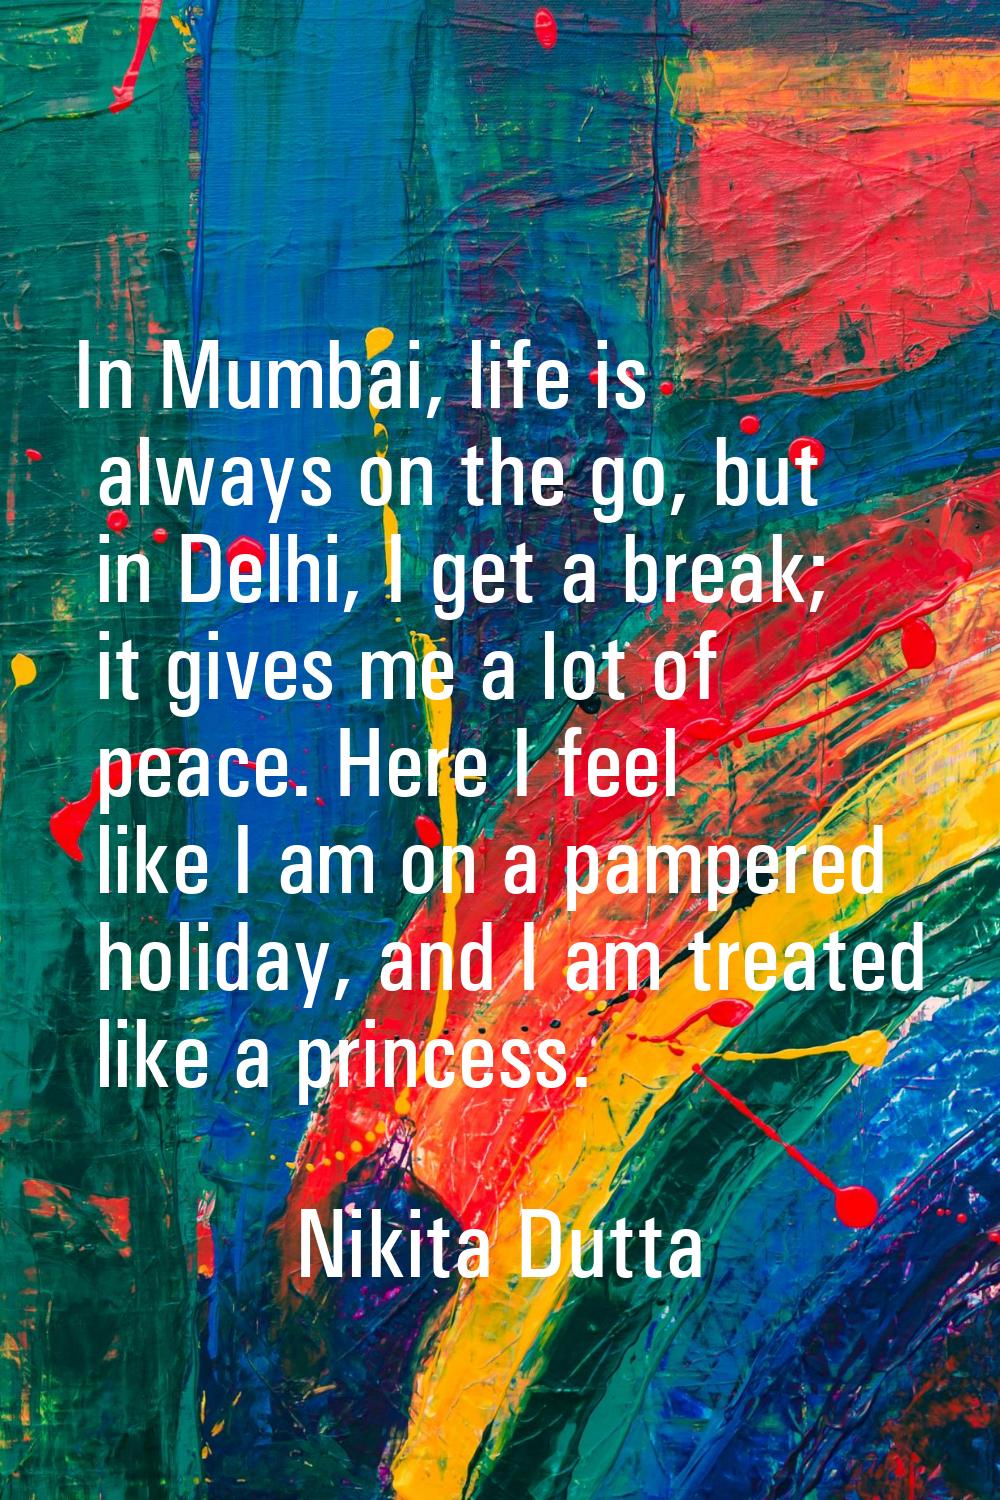 In Mumbai, life is always on the go, but in Delhi, I get a break; it gives me a lot of peace. Here 